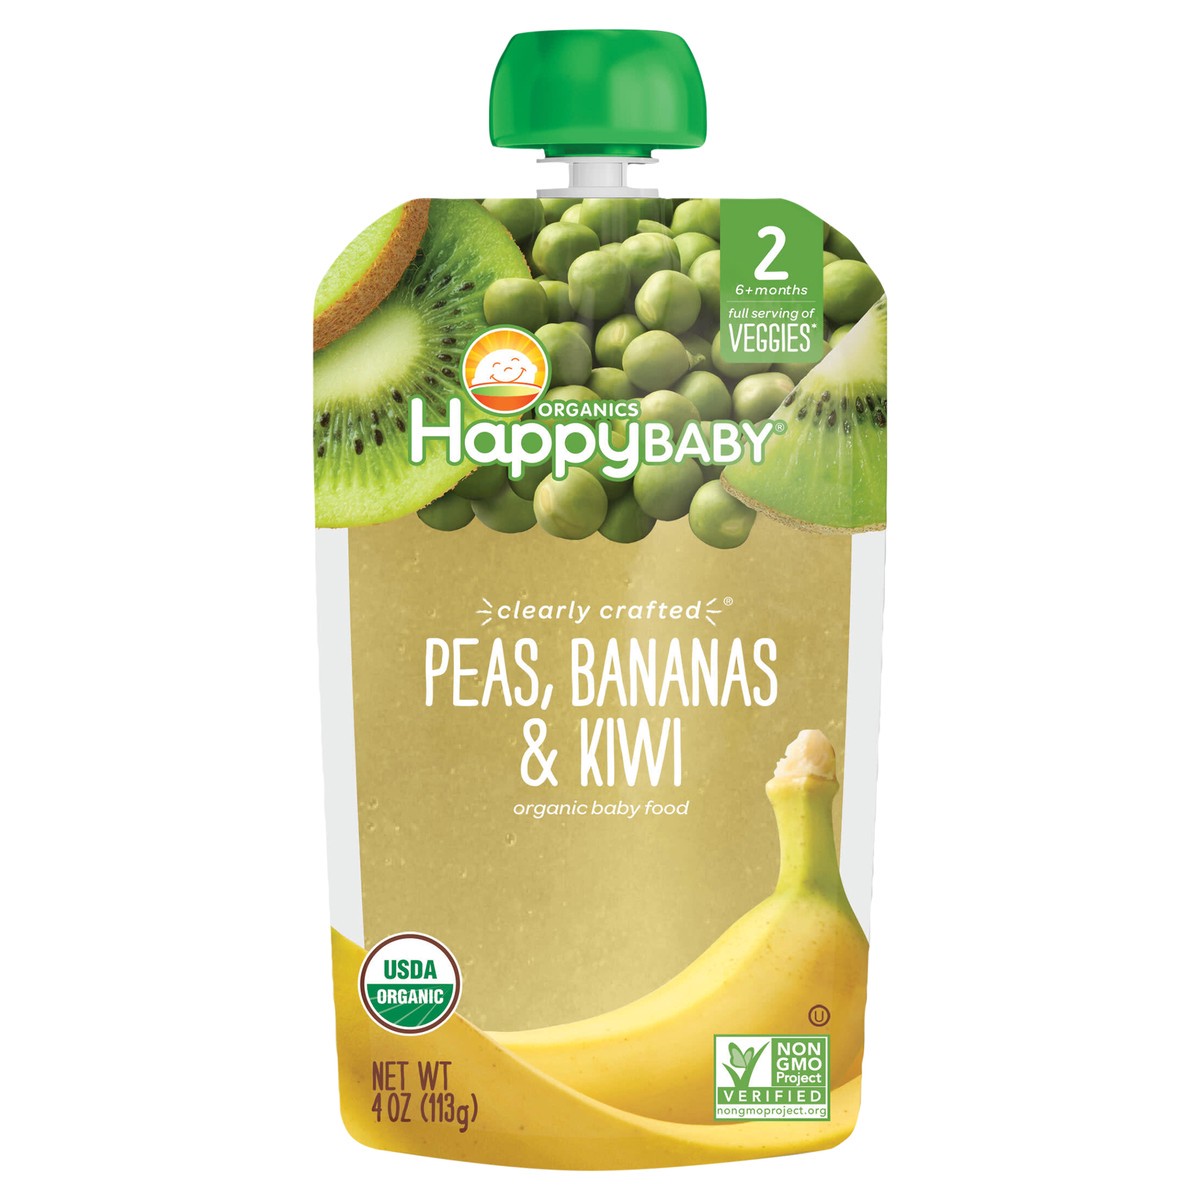 slide 6 of 6, Happy Baby Organics Clearly Crafted Stage 2 Peas, Bananas & Kiwi Pouch 4oz UNIT, 4 oz